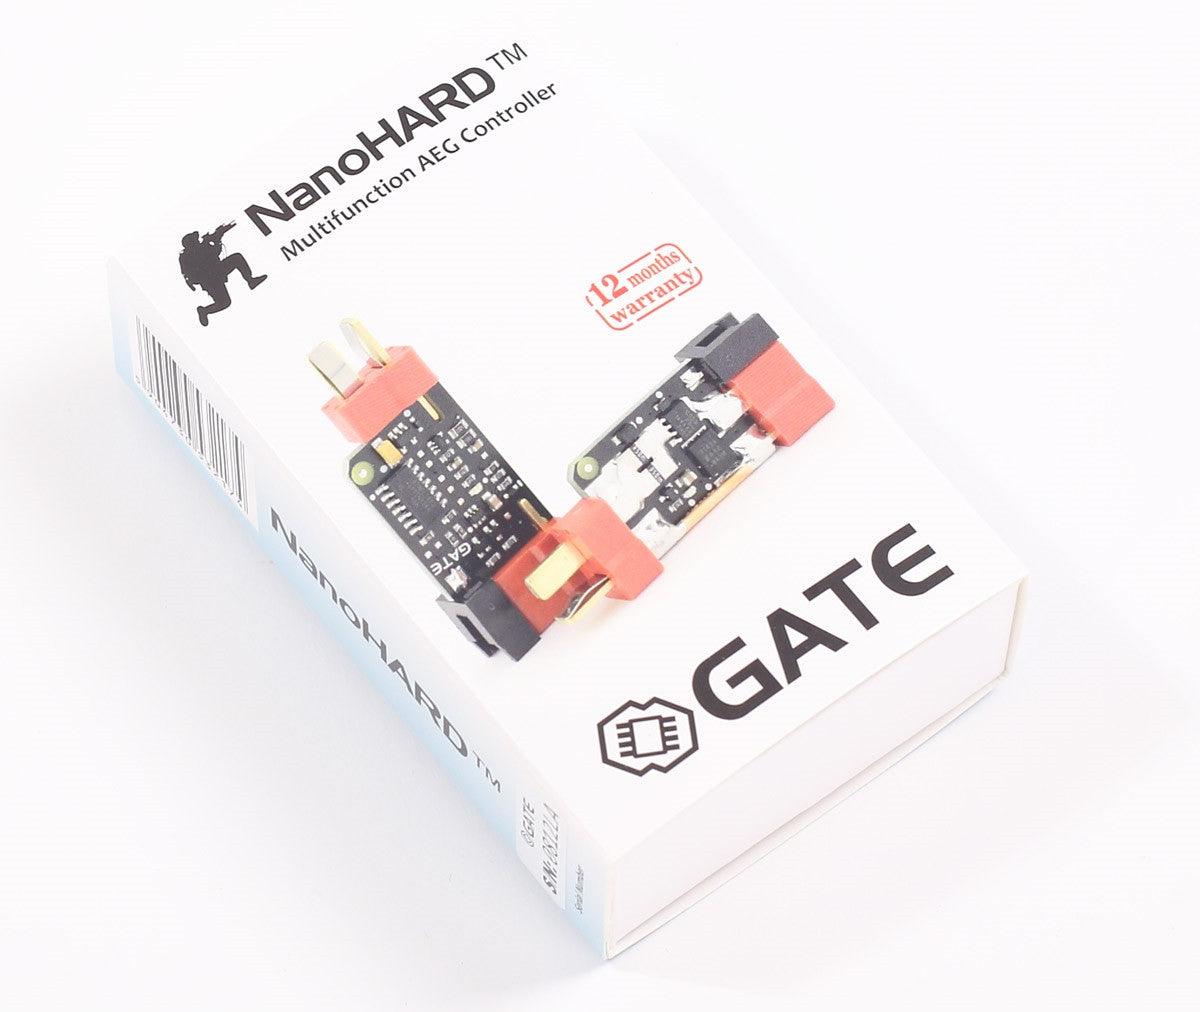 Airsoft Gate Electronics Pièces Upgrade Gate Mosfet NanoAAB